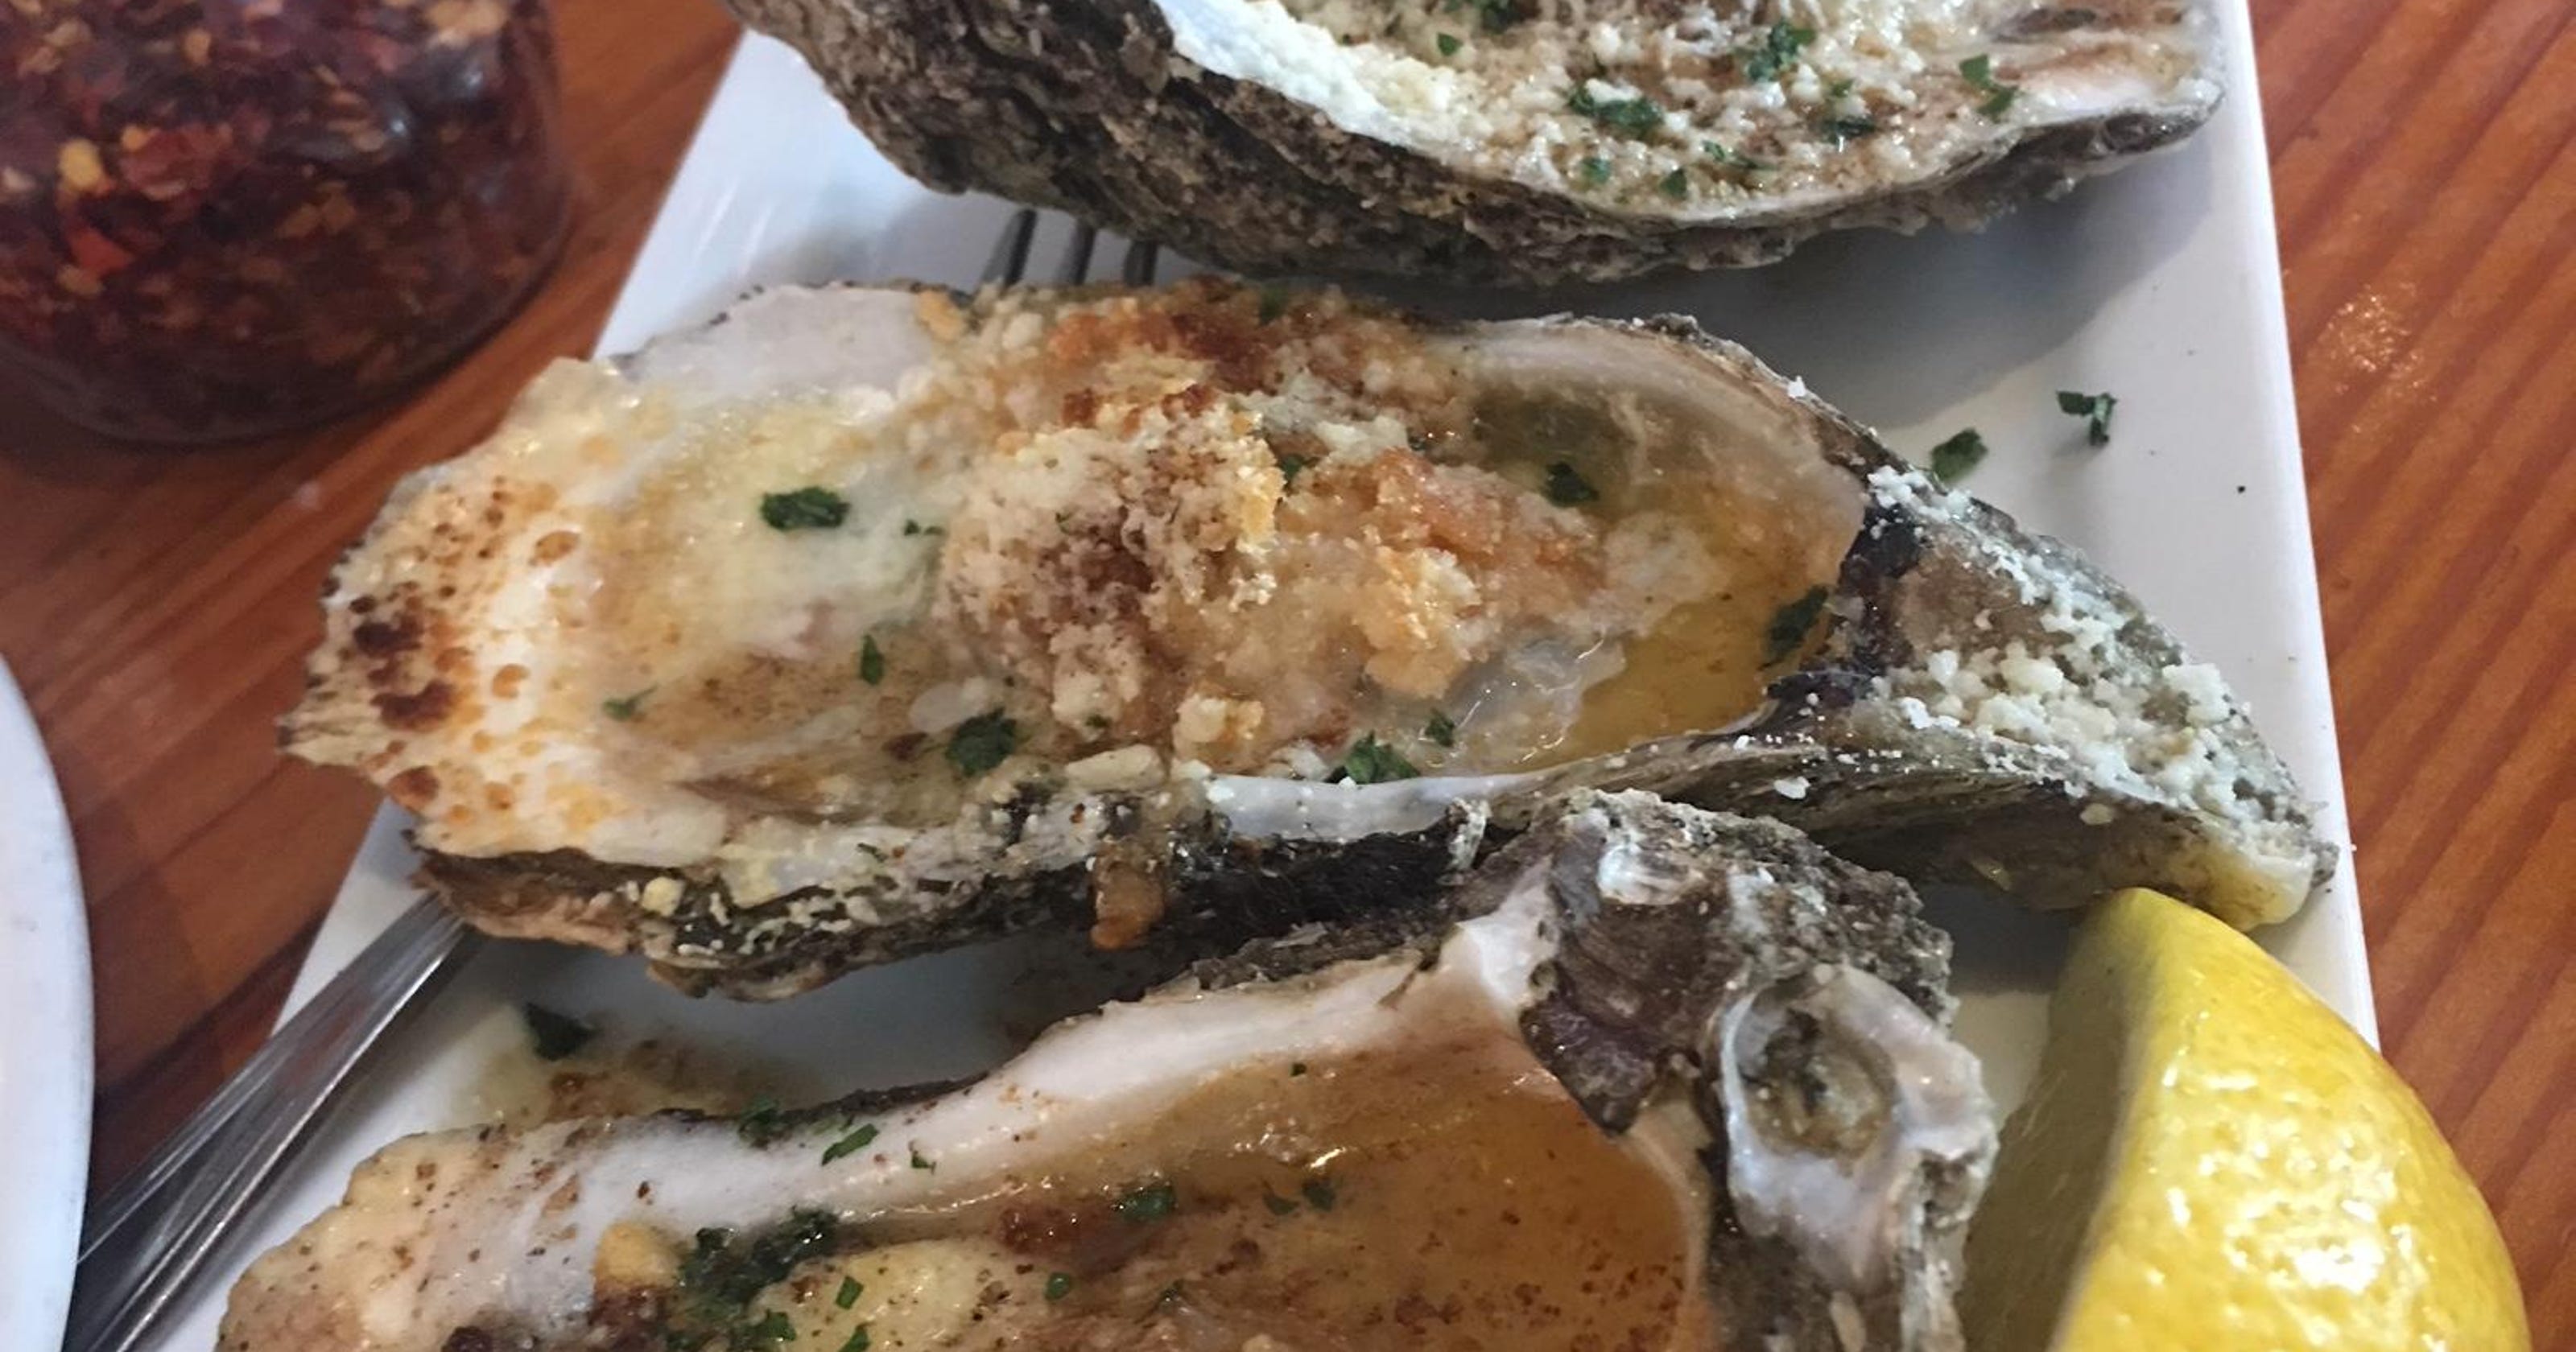 The 5 best places to eat oysters in Shreveport